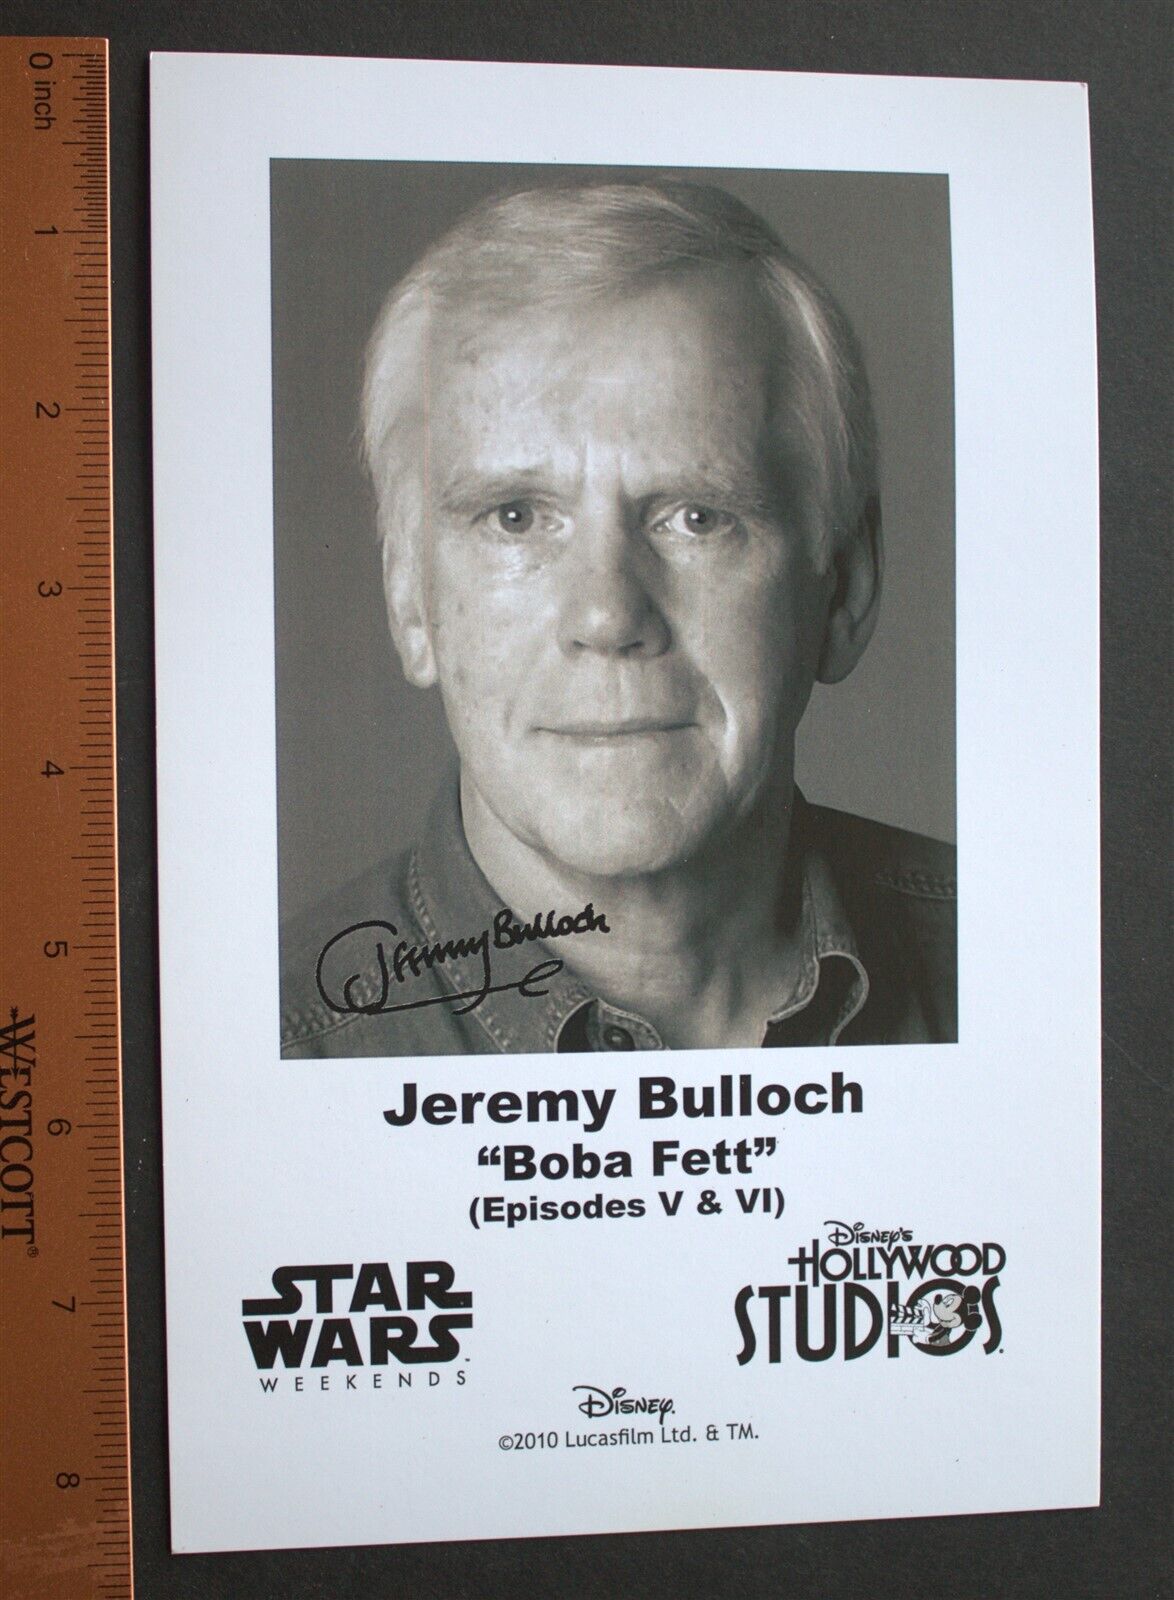 Disney Star Wars Weekends Jeremy Bulloch photo signed w/ photographic signature